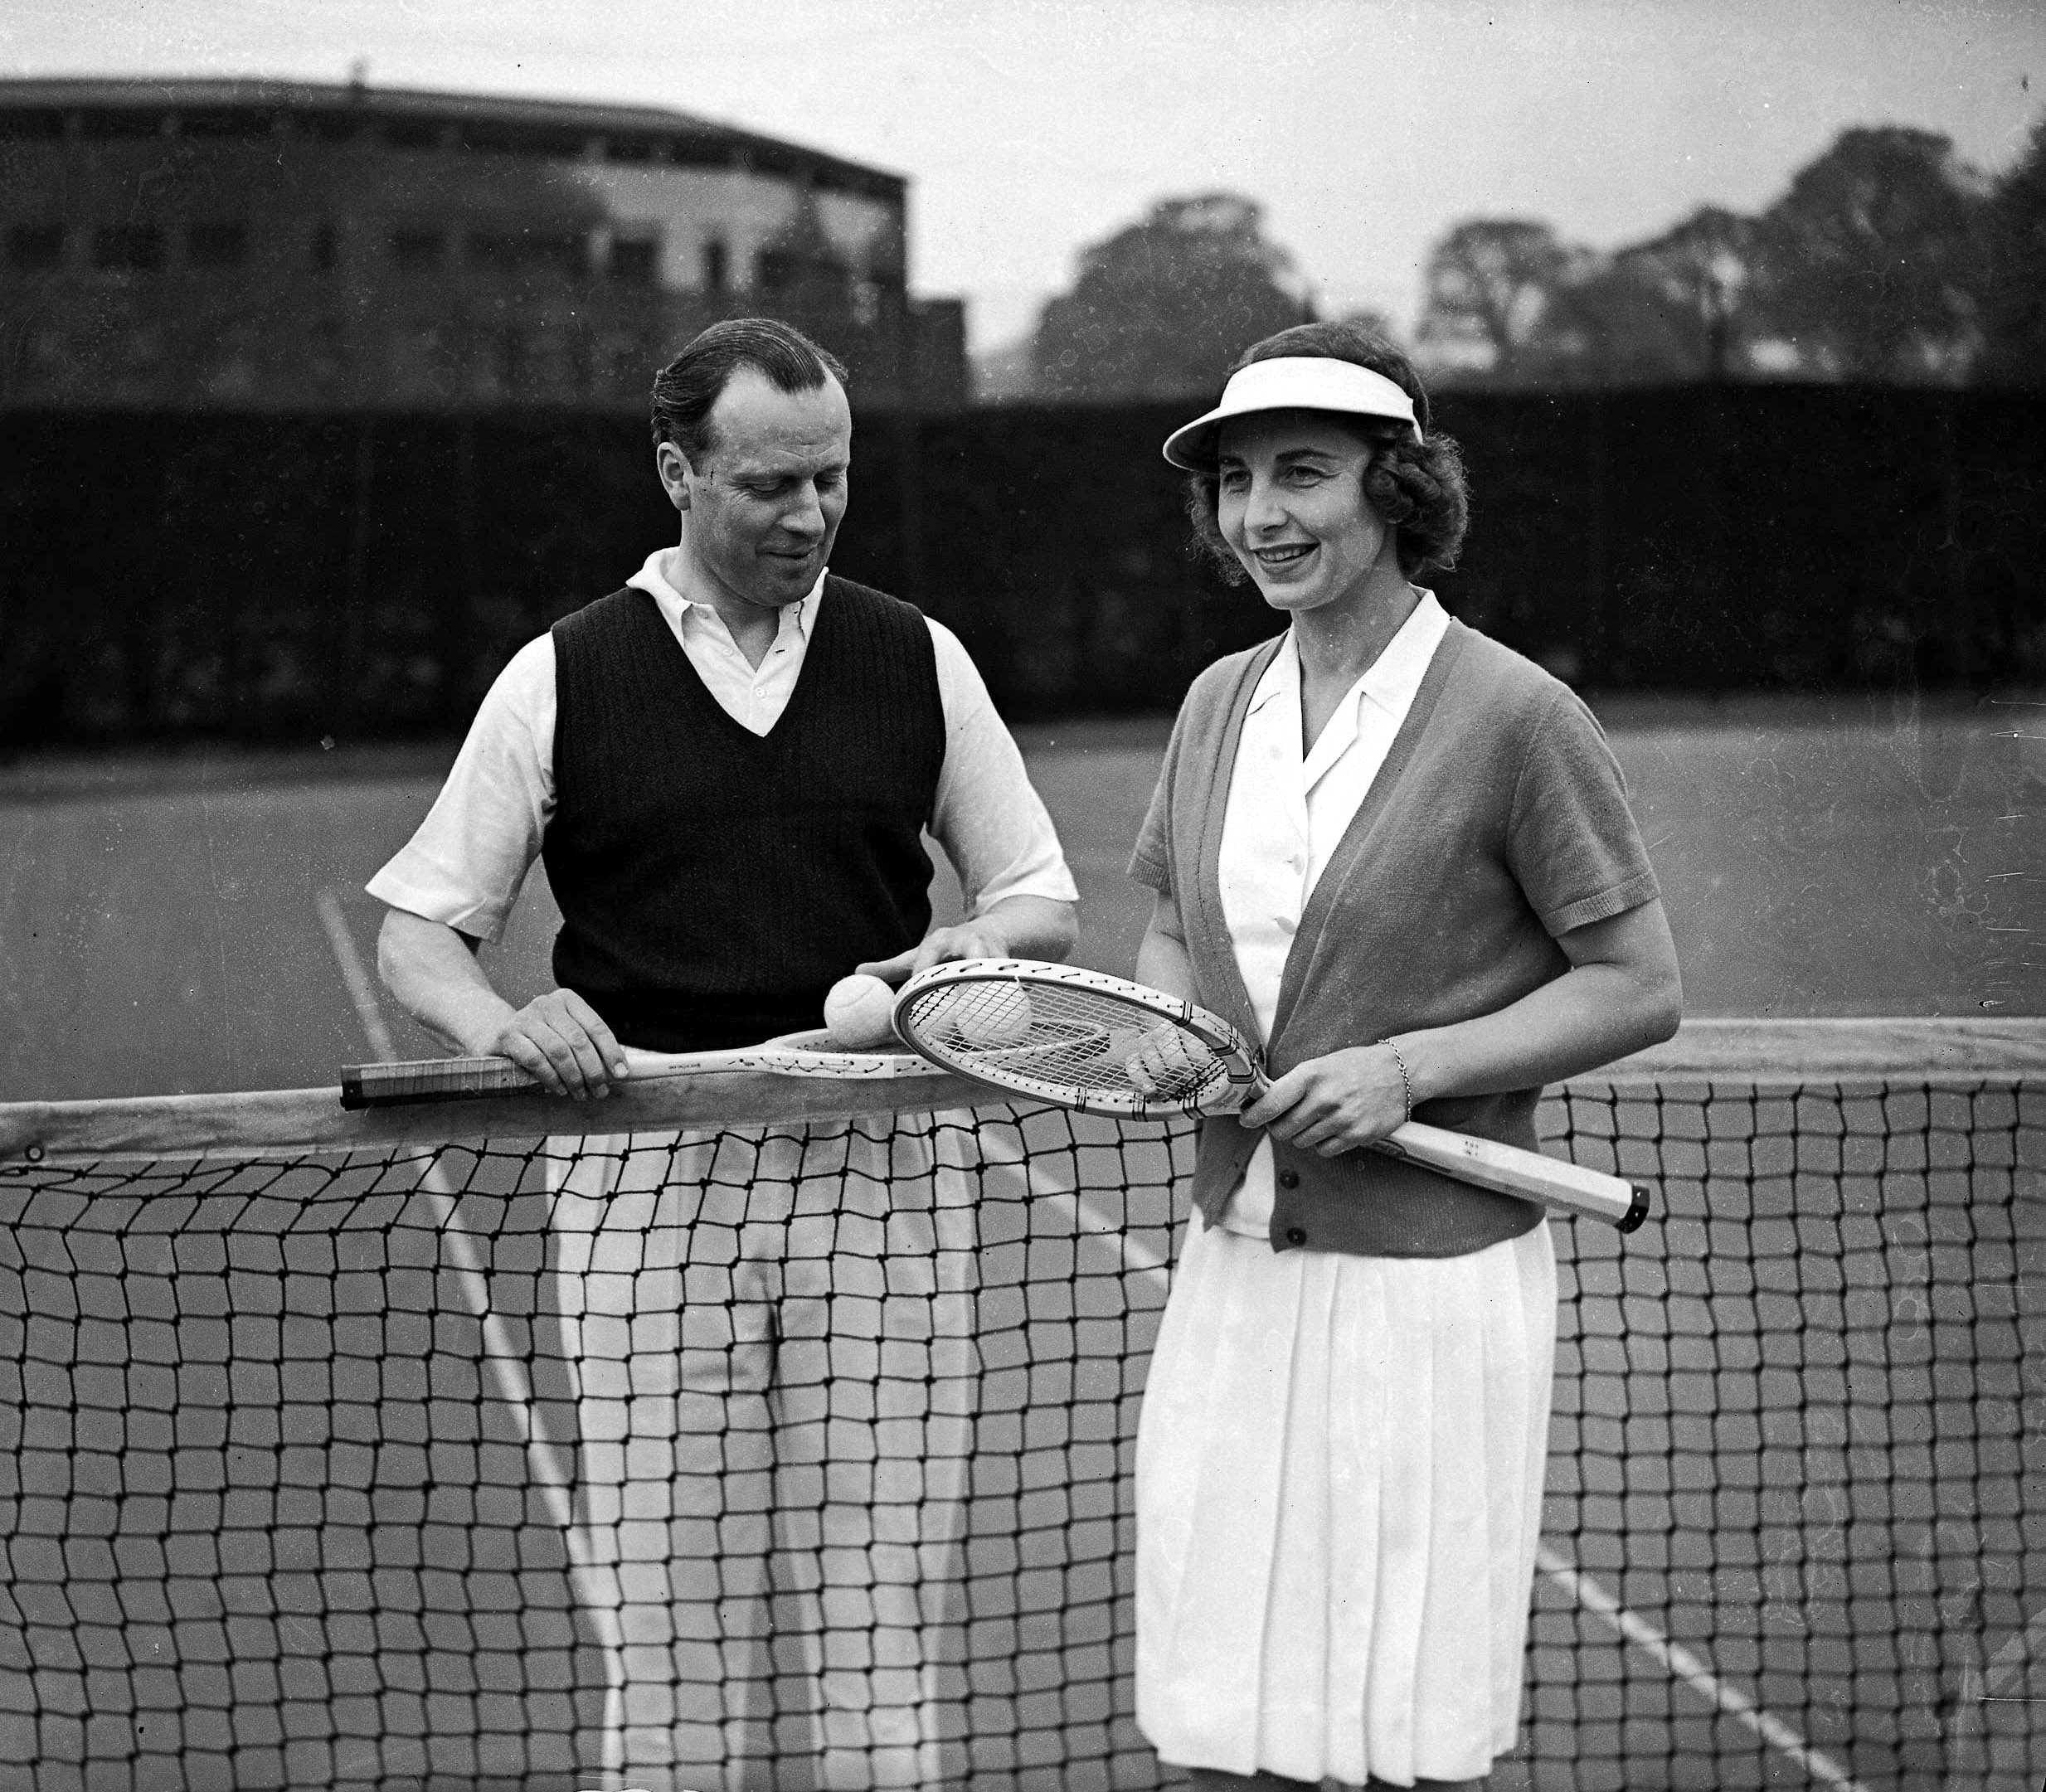 Legendary US tennis player Helen Wills Moody with Victor Cazalet at Wimbledon